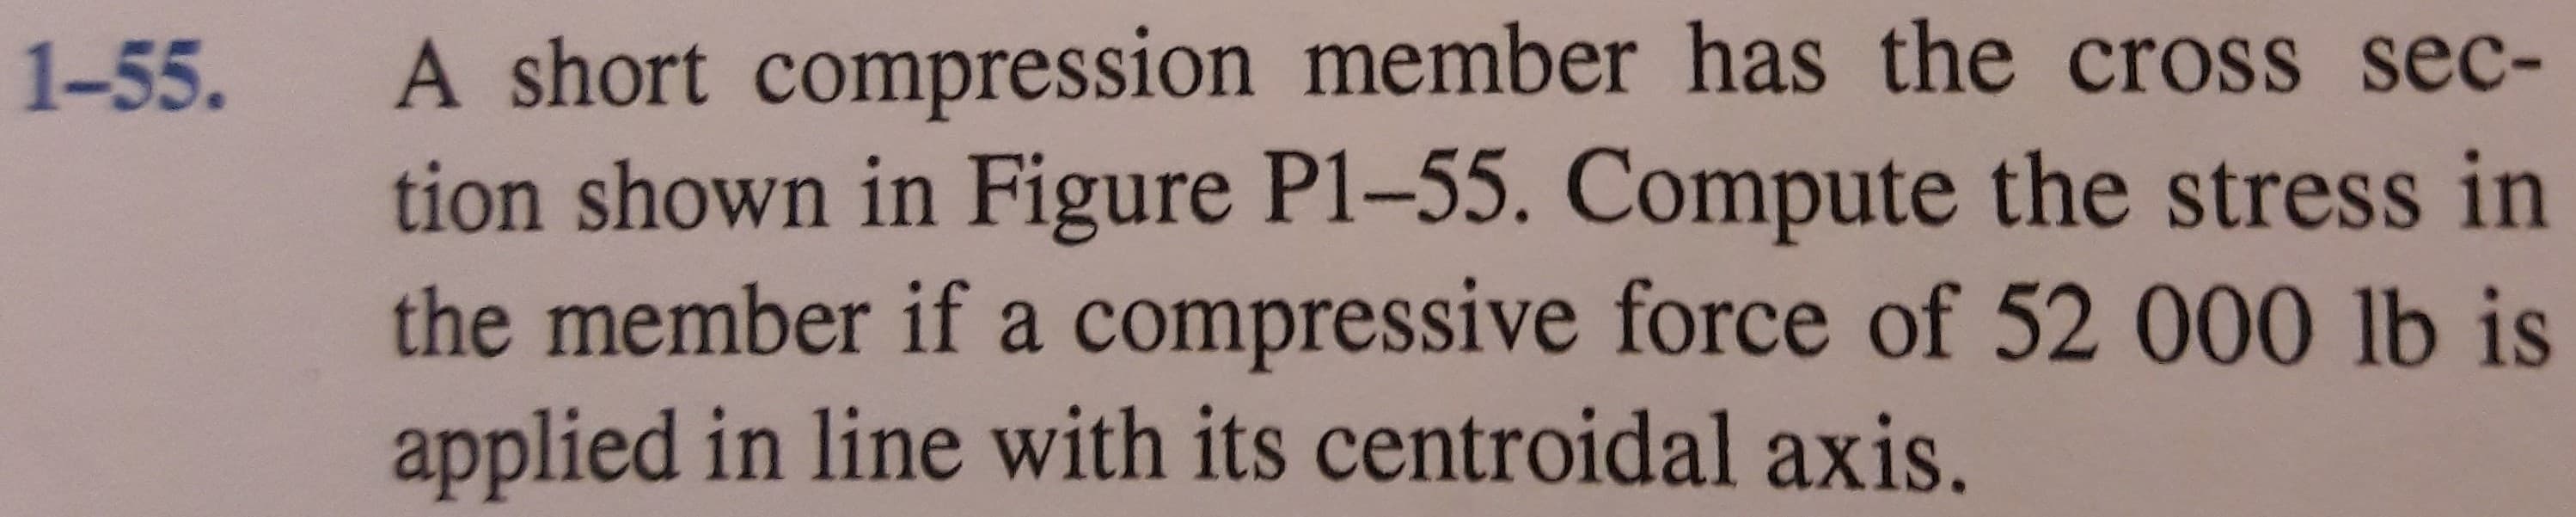 A short compression member has the cross sec-
tion shown in Figure P1-55. Compute the stress in
the member if a compressive force of 52 000 lb is
applied in line with its centroidal axis.
1-55.
